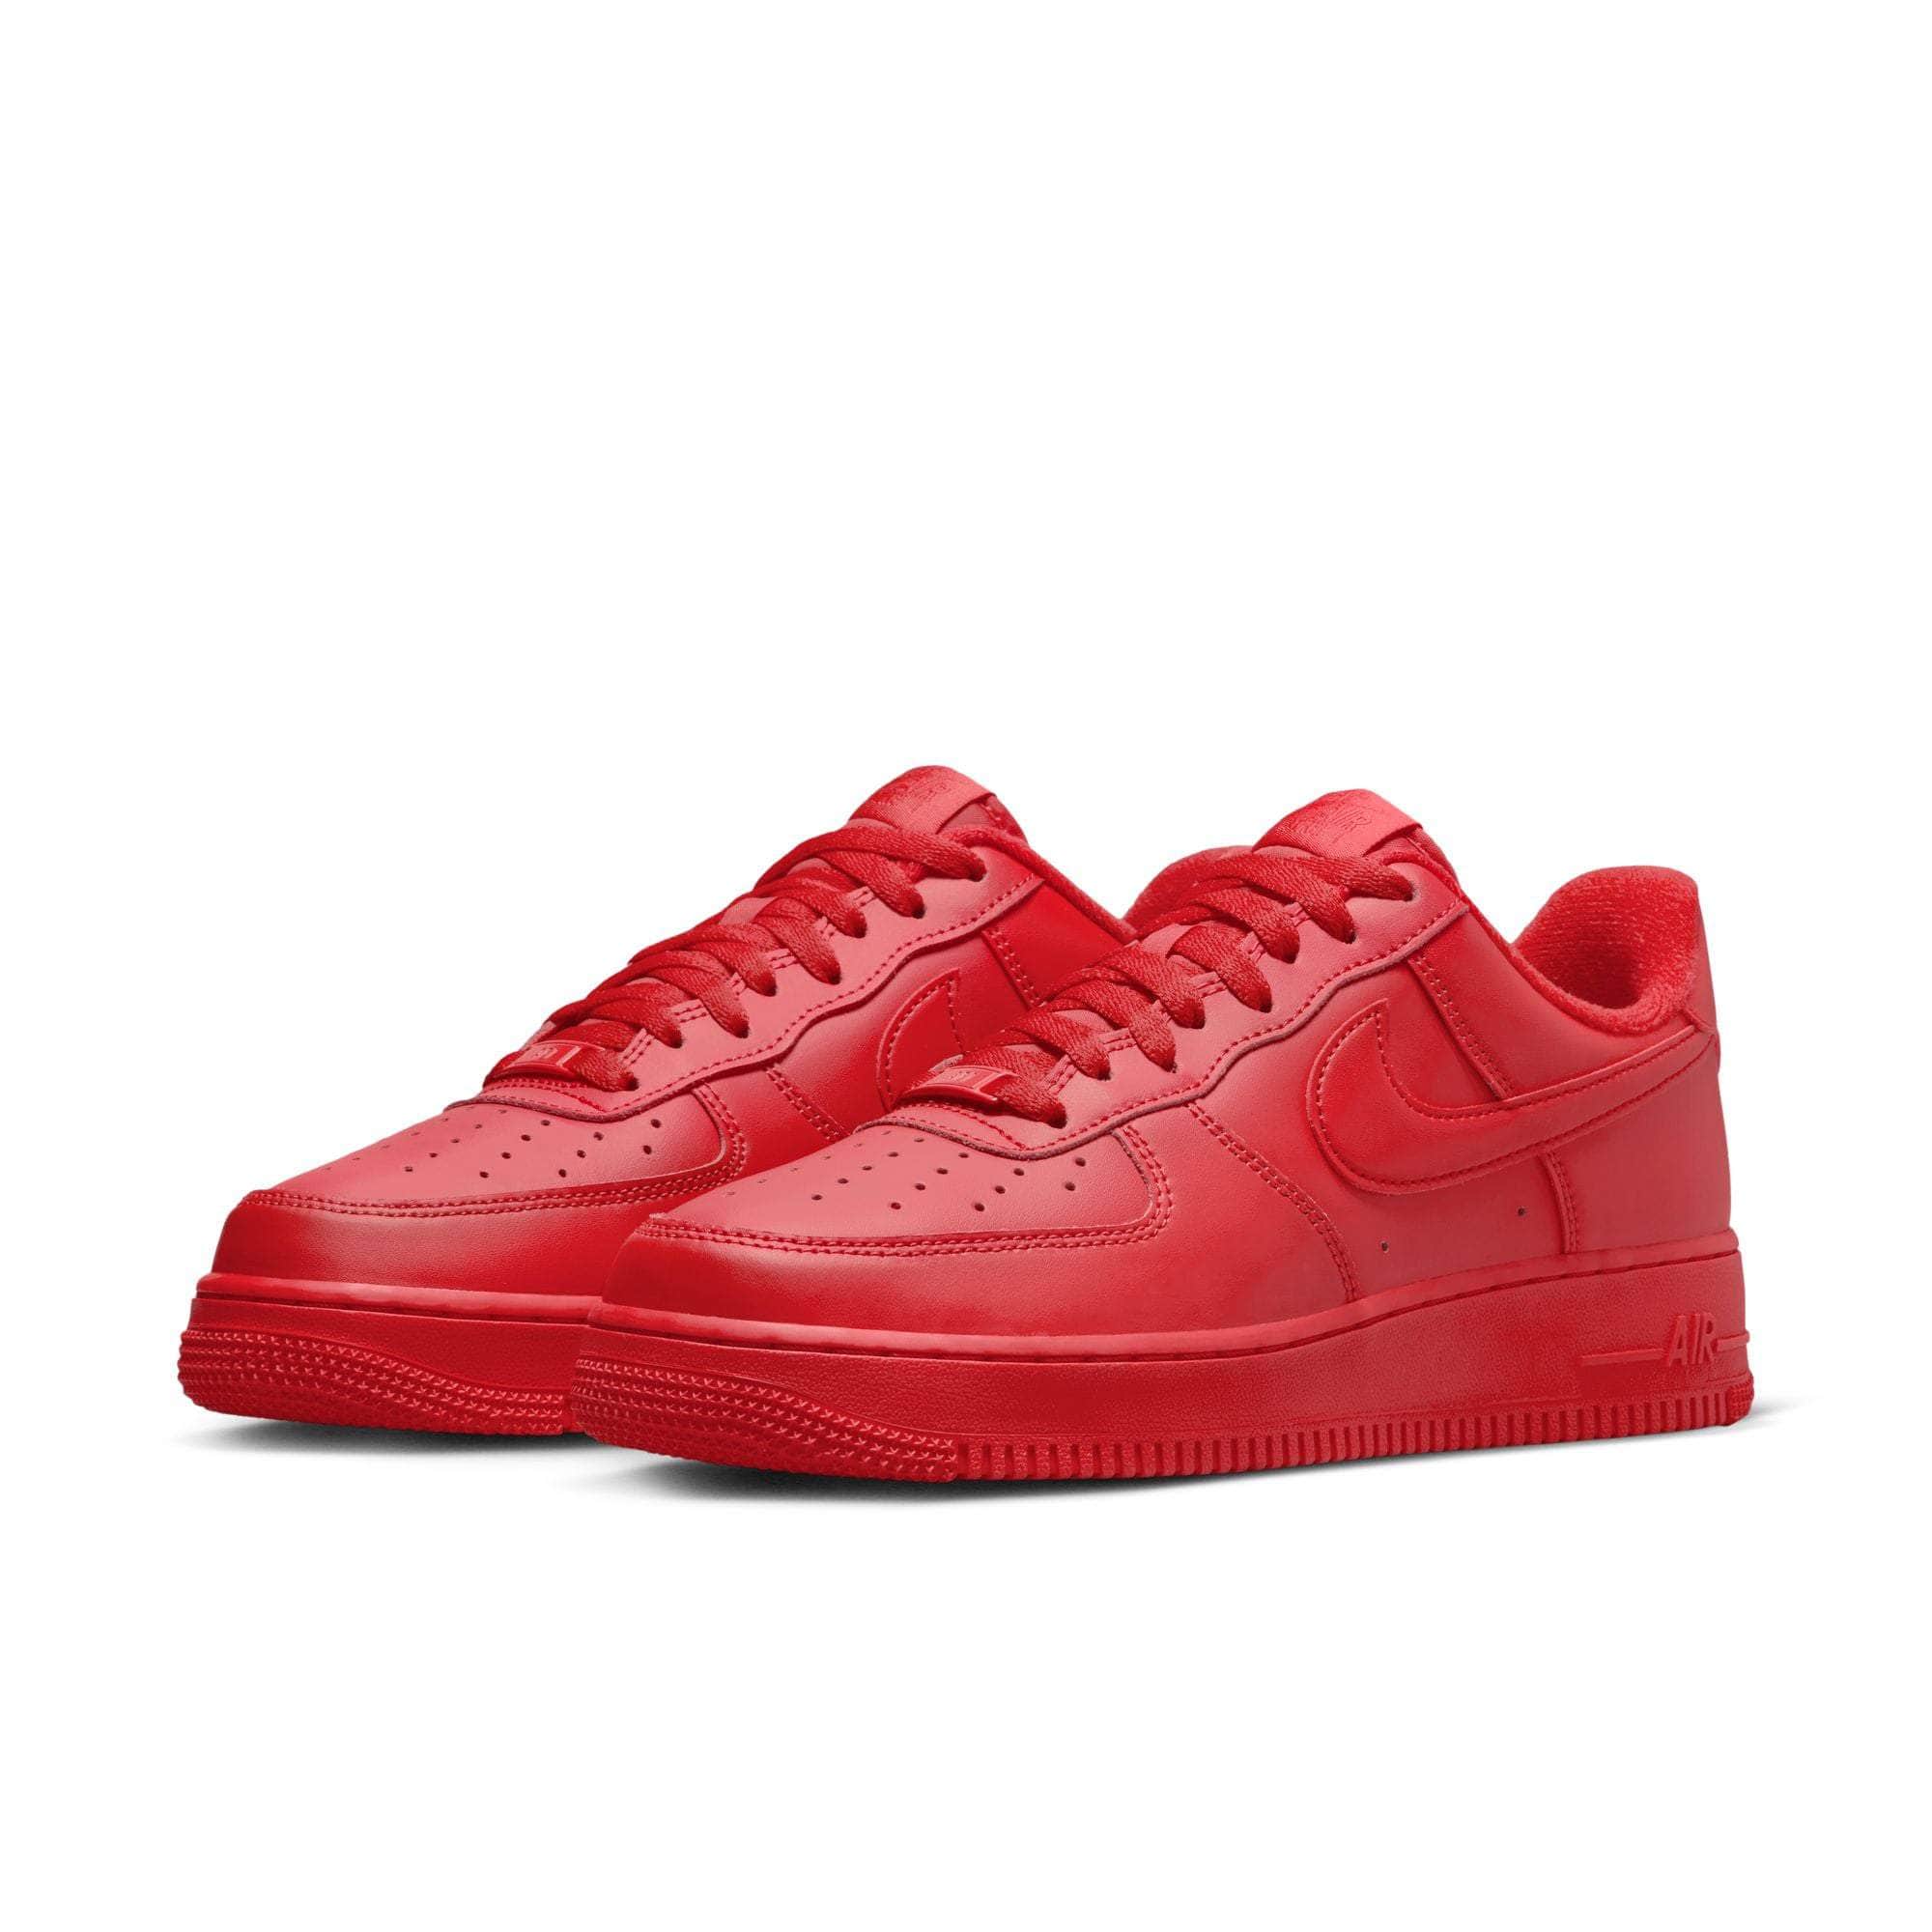 Nike Air Force 1 '07 LV8 1 Shoes - Men's - GBNY